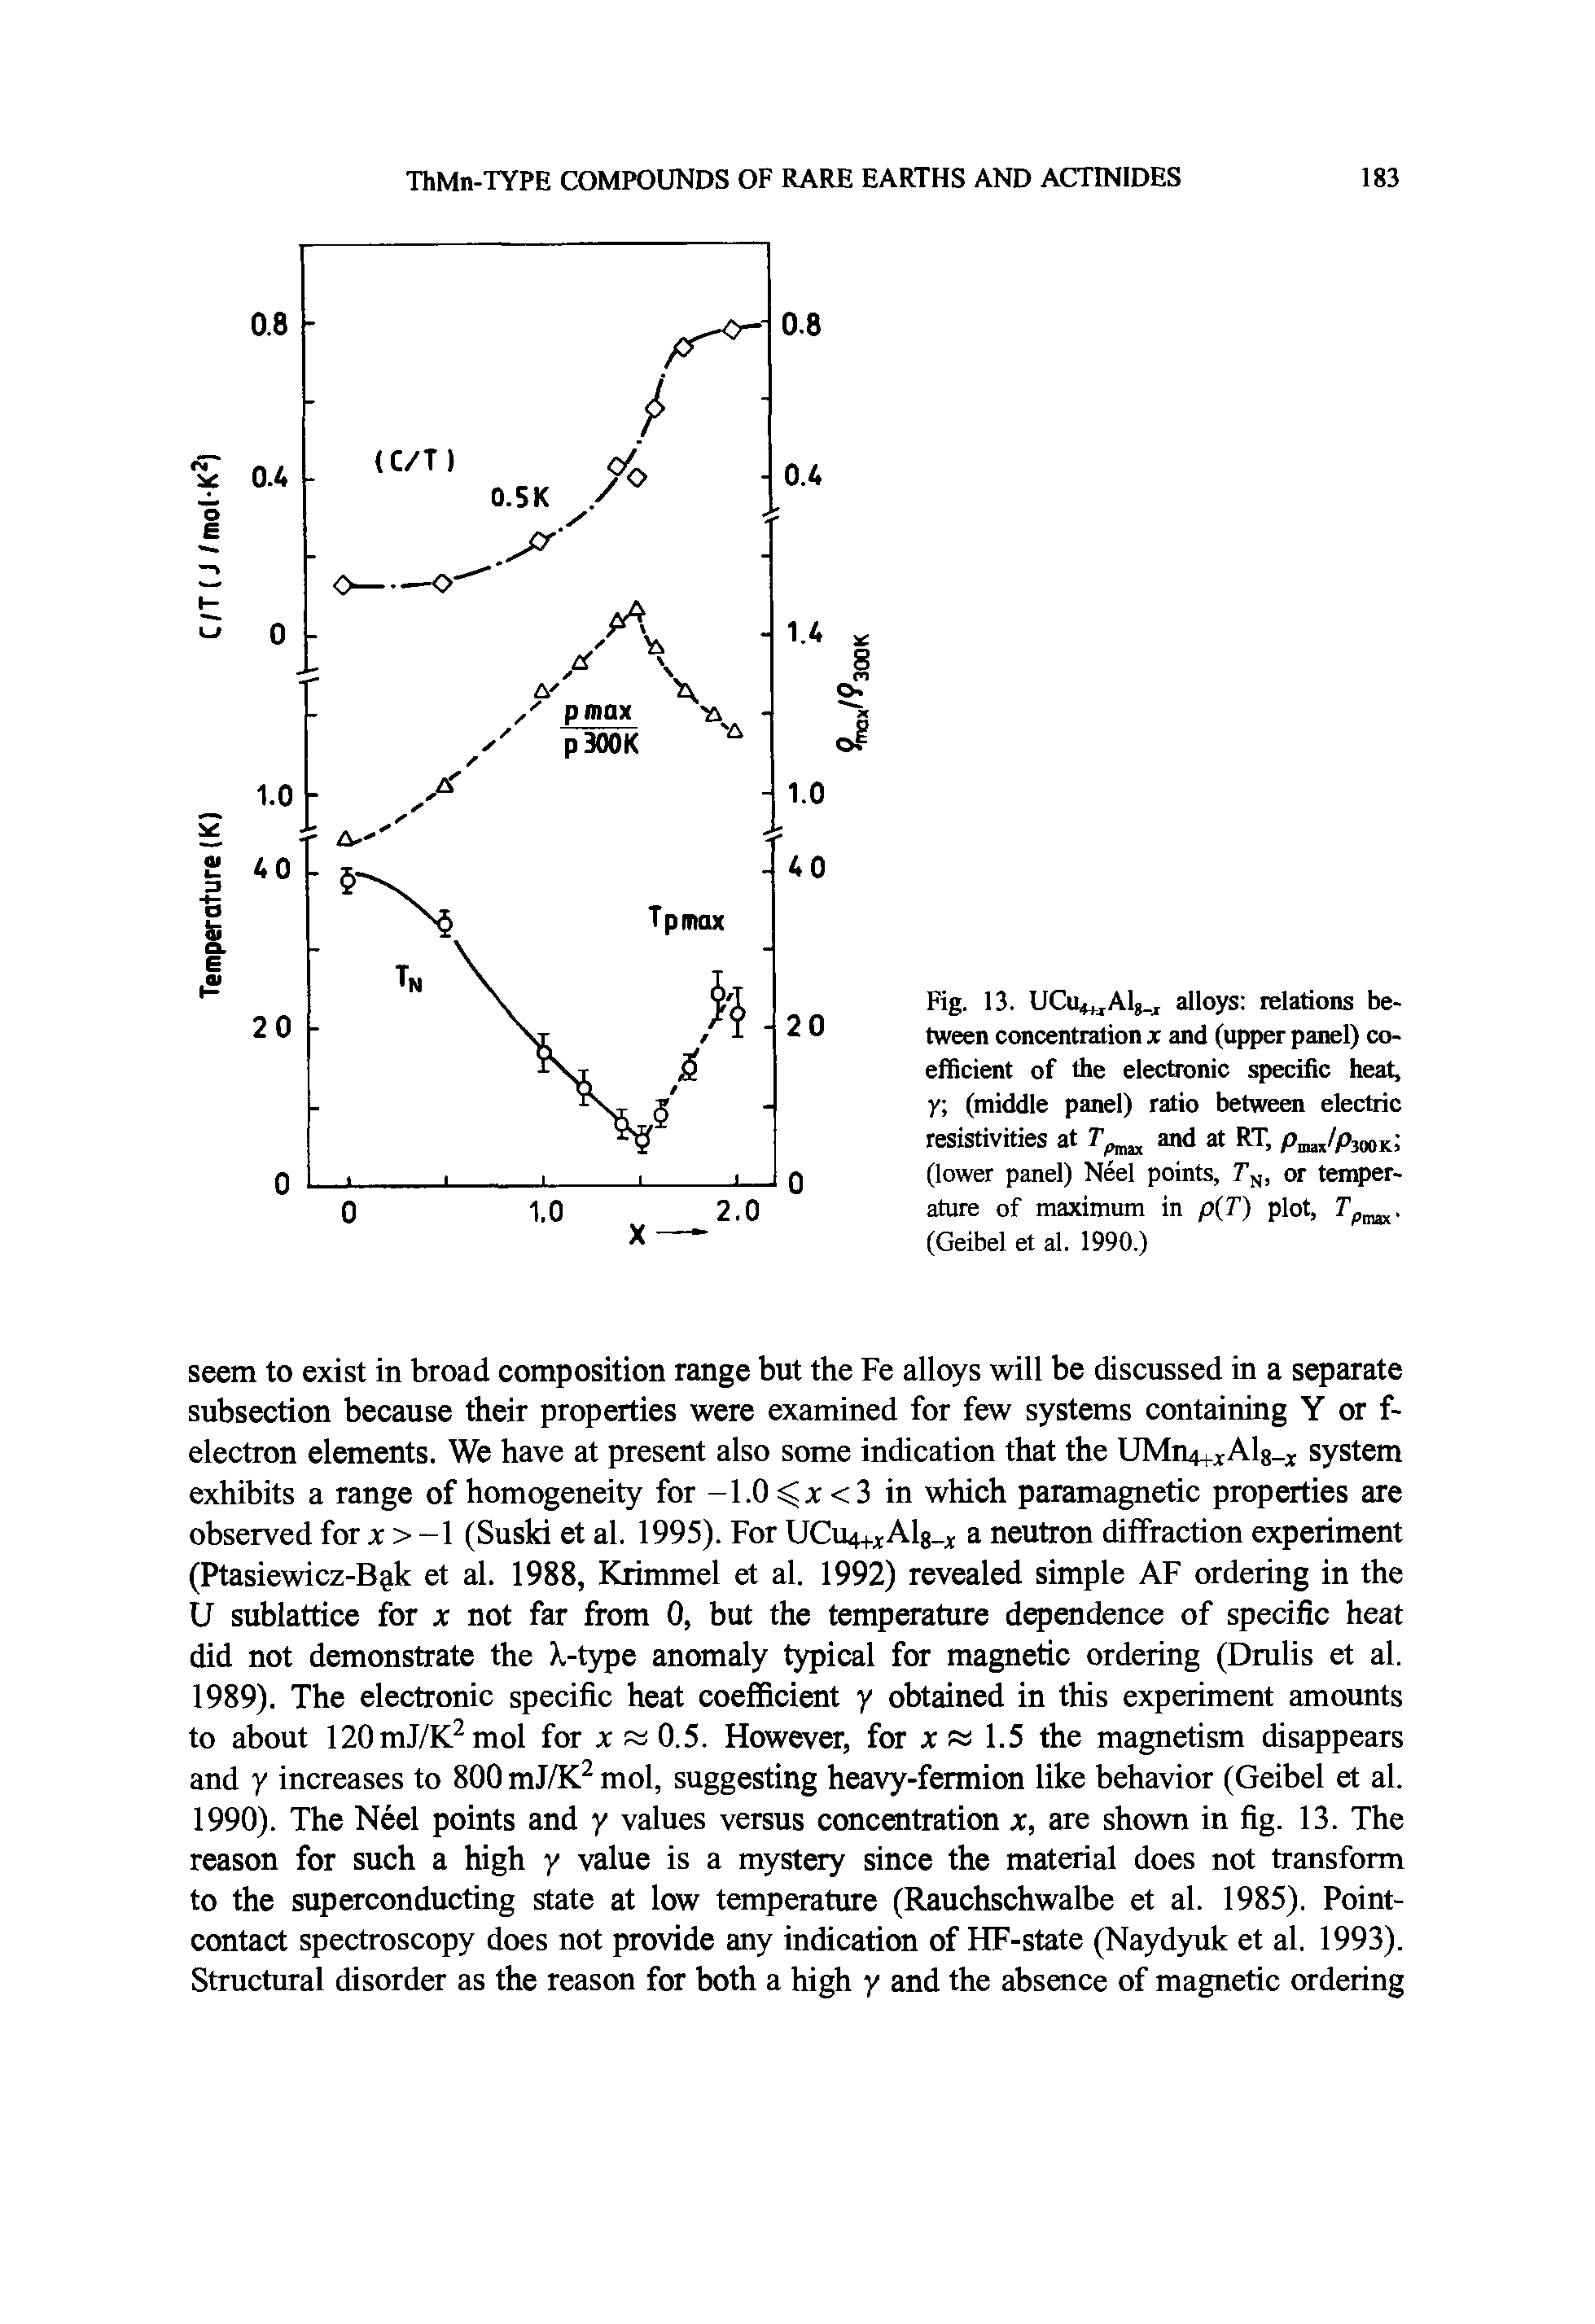 Fig. 13. UCu4j,A1. j alloys relations between concentration x and (upper panel) coefficient of the electronic specific heat, y (middle panel) ratio between electric resistivities at and at RT, p /pnoxl (lower panel) Neel points, or temperature of maximum in p(T) plot,...